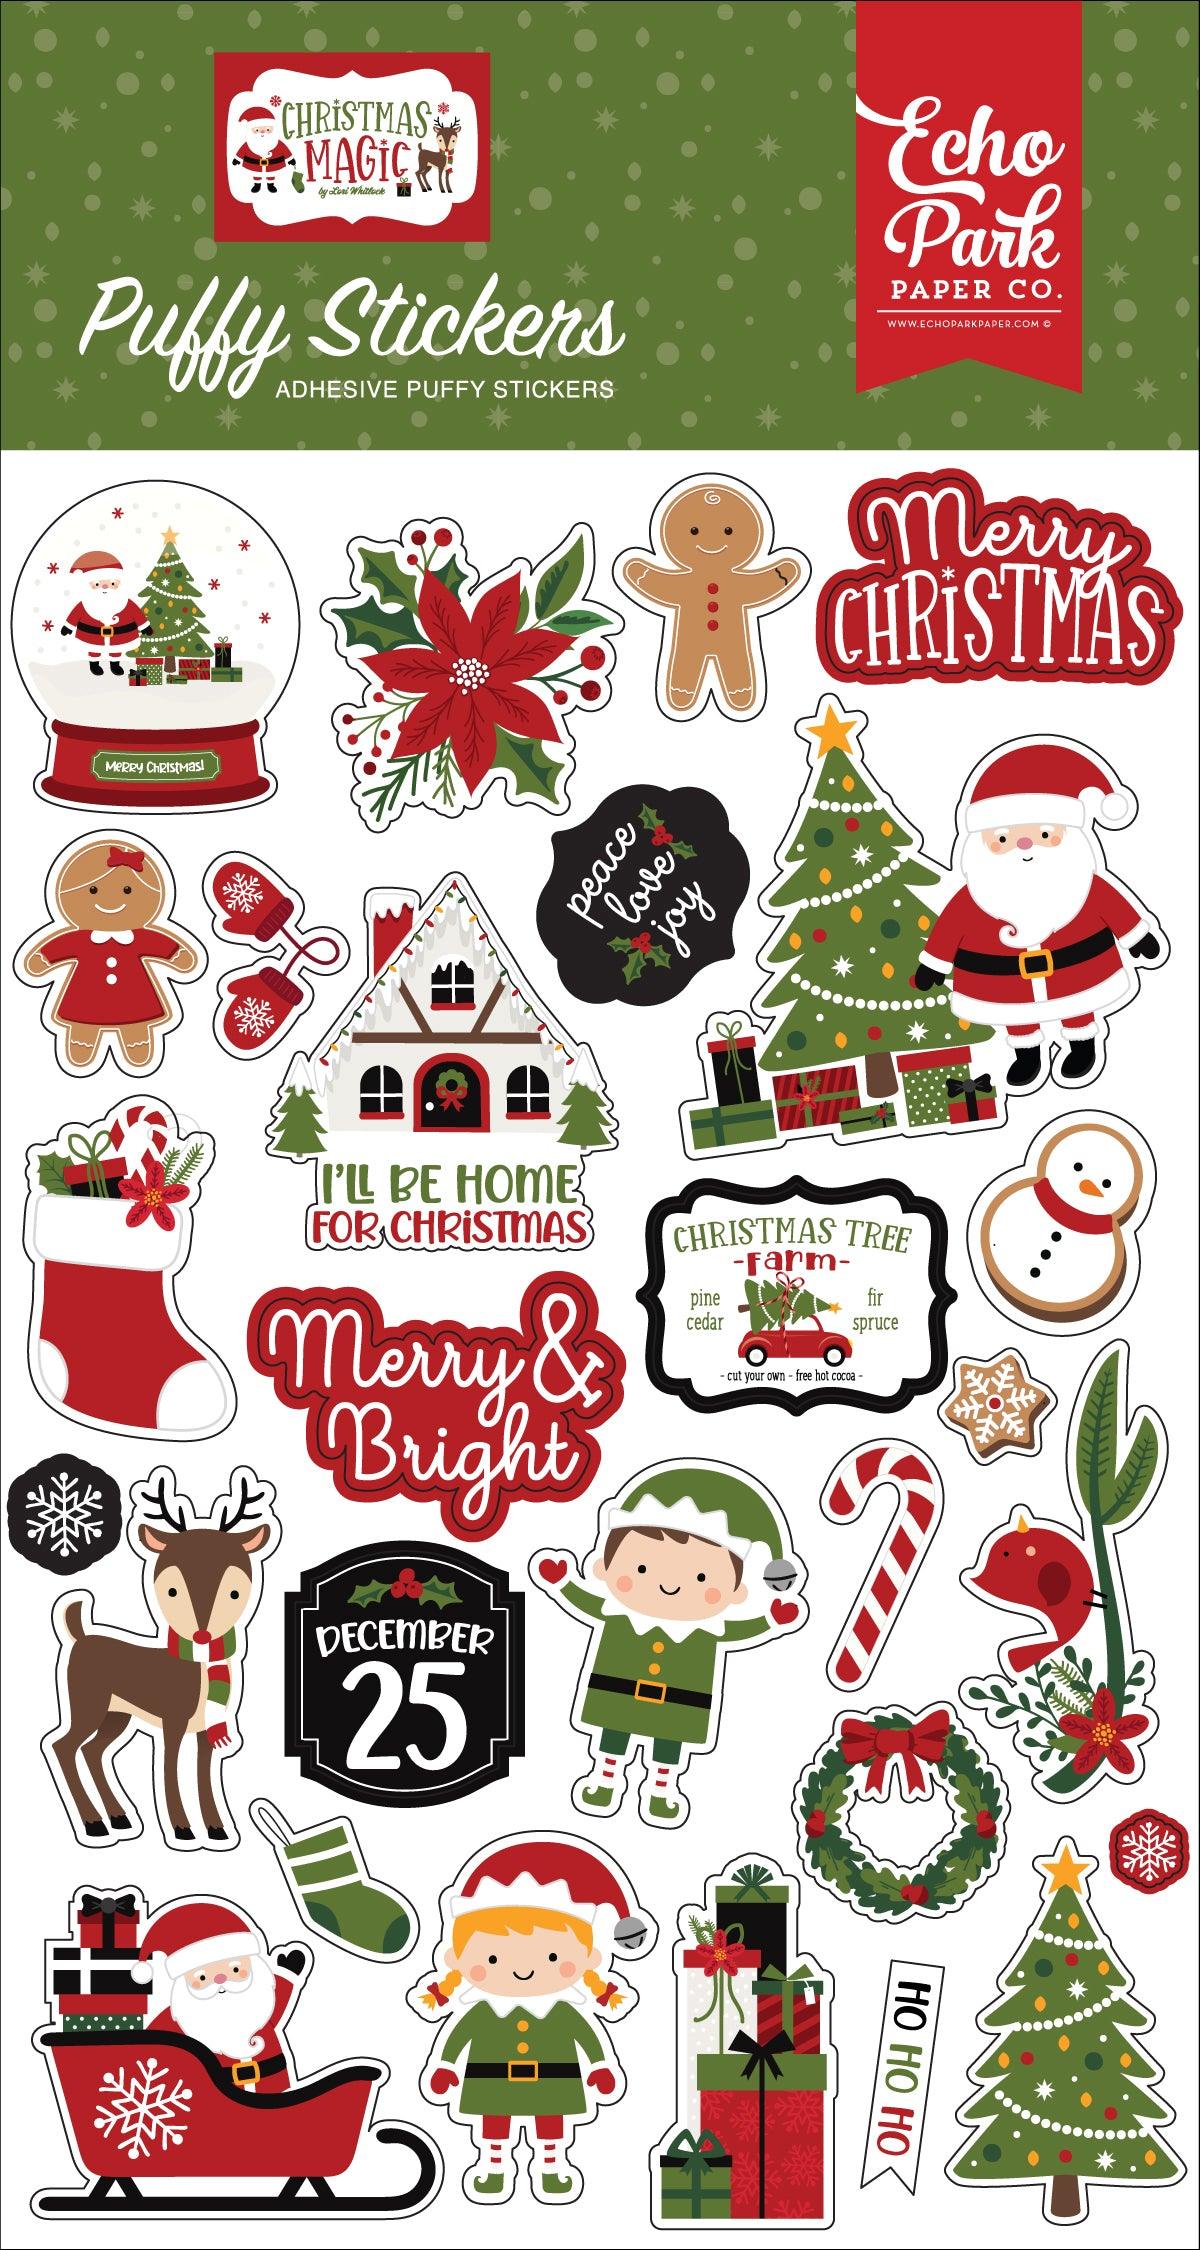 Christmas Magic Collection 4 x 7 Puffy Stickers Scrapbook Embellishments by Echo Park Paper - Scrapbook Supply Companies